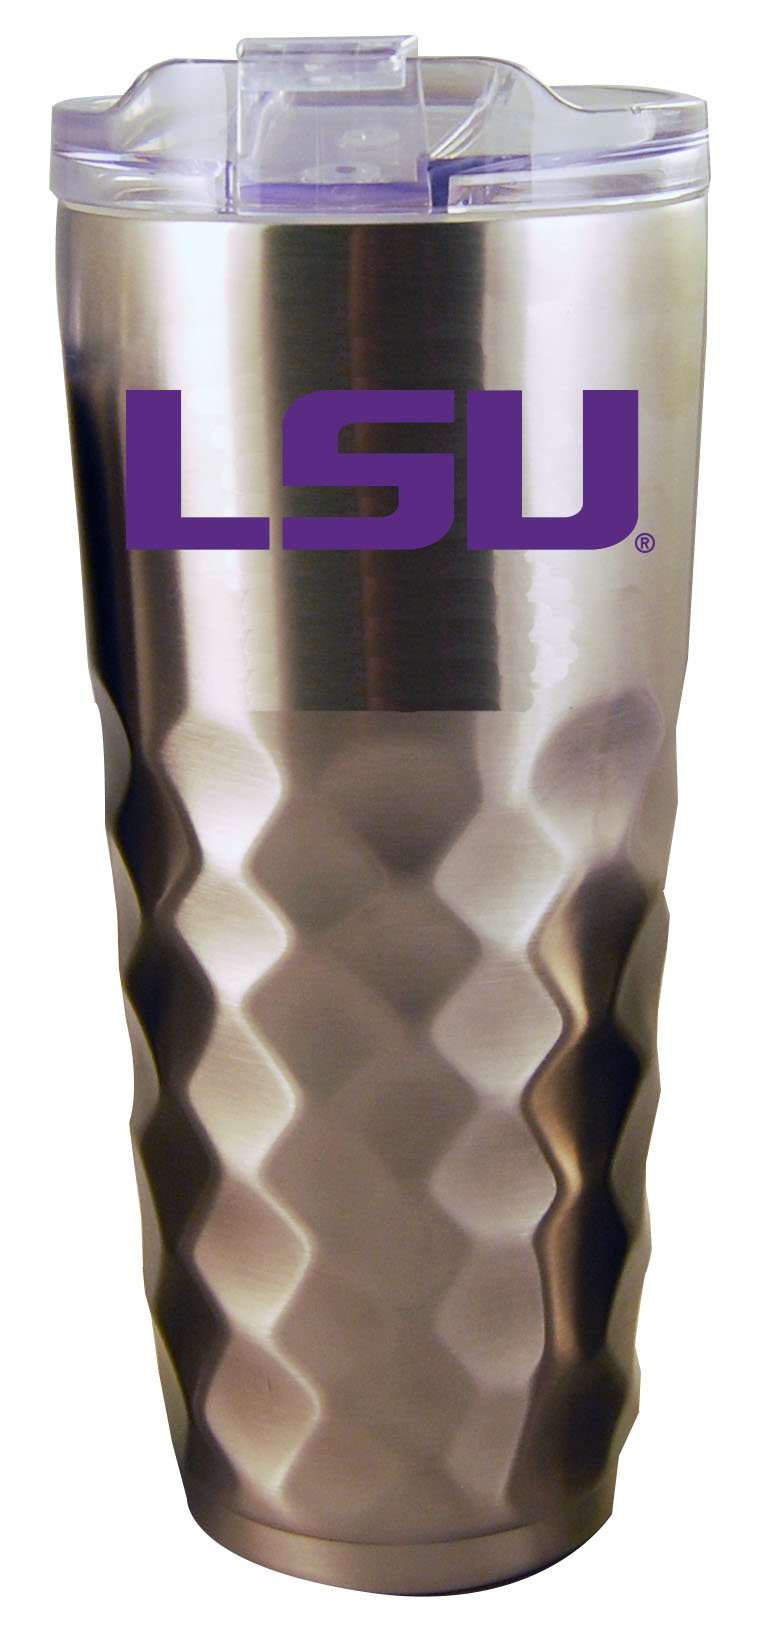 32OZ SS DIAMD TMBLR  LOUISIANA ST
COL, CurrentProduct, Drinkware_category_All, LSU, LSU Tigers
The Memory Company